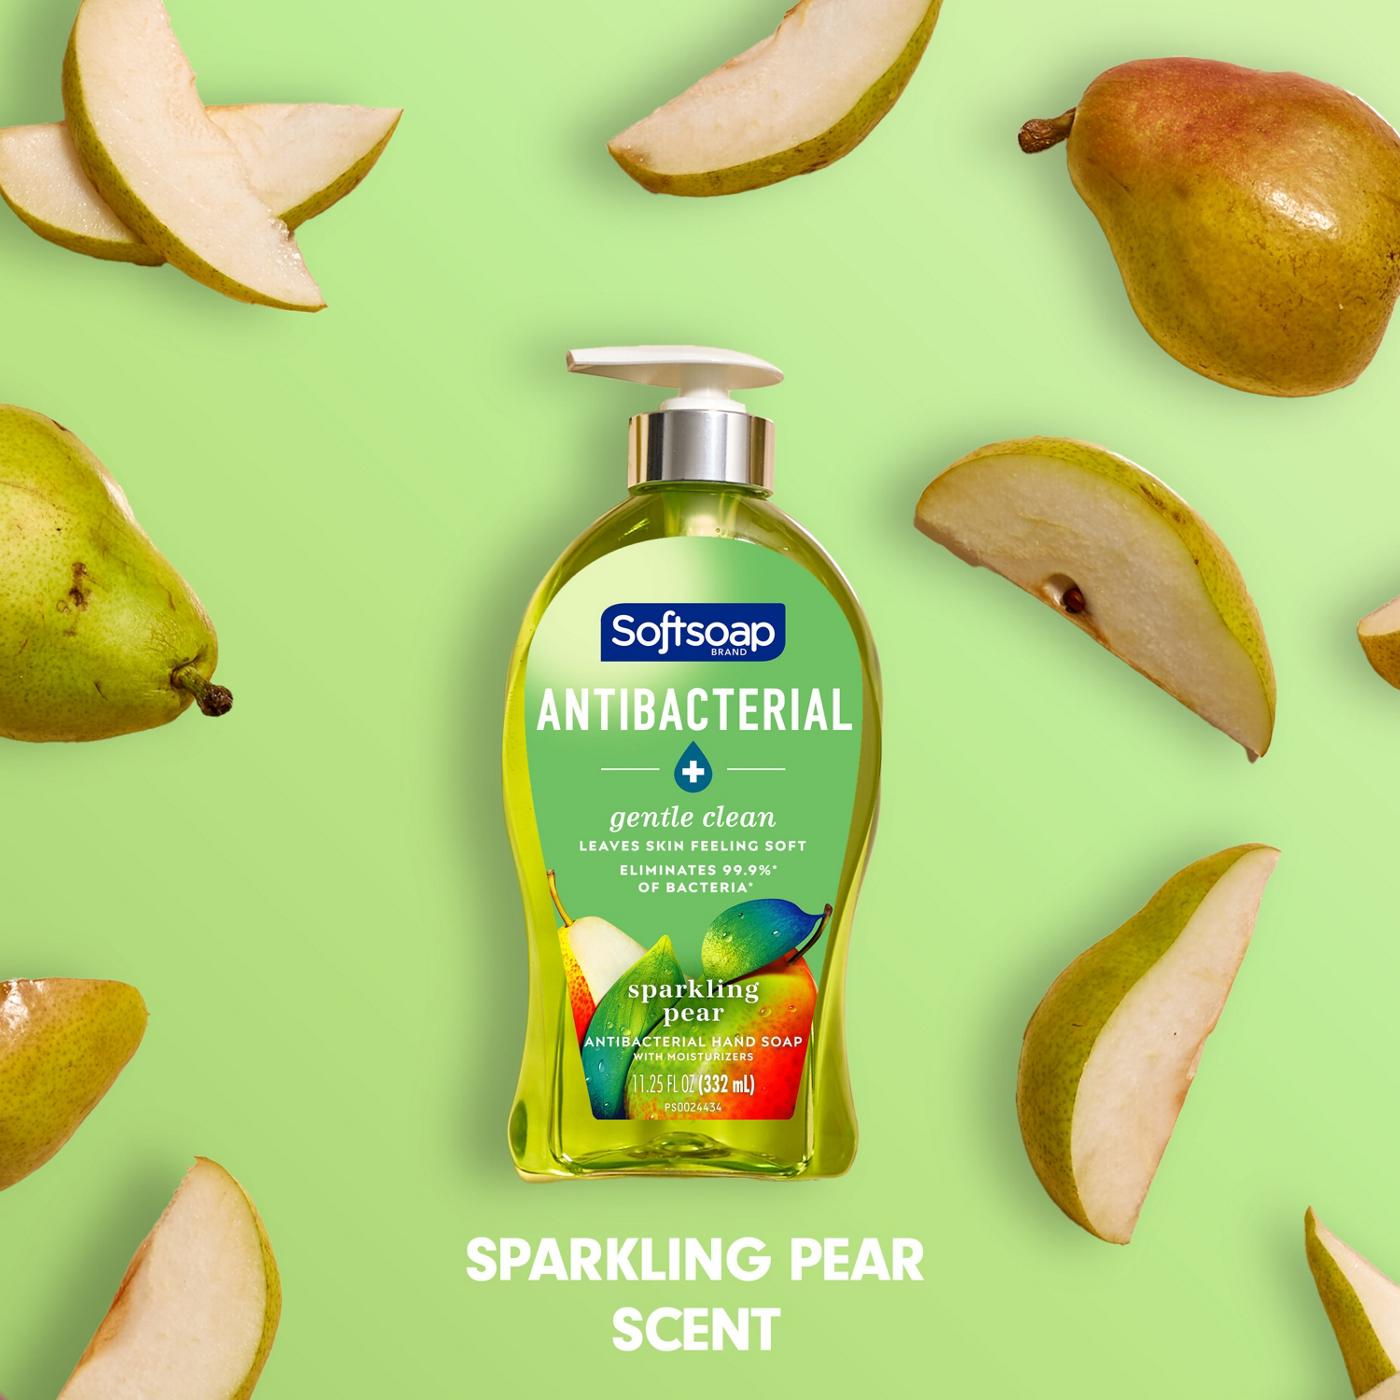 Softsoap Antibacterial Hand Soap - Sparkling Pear; image 3 of 6